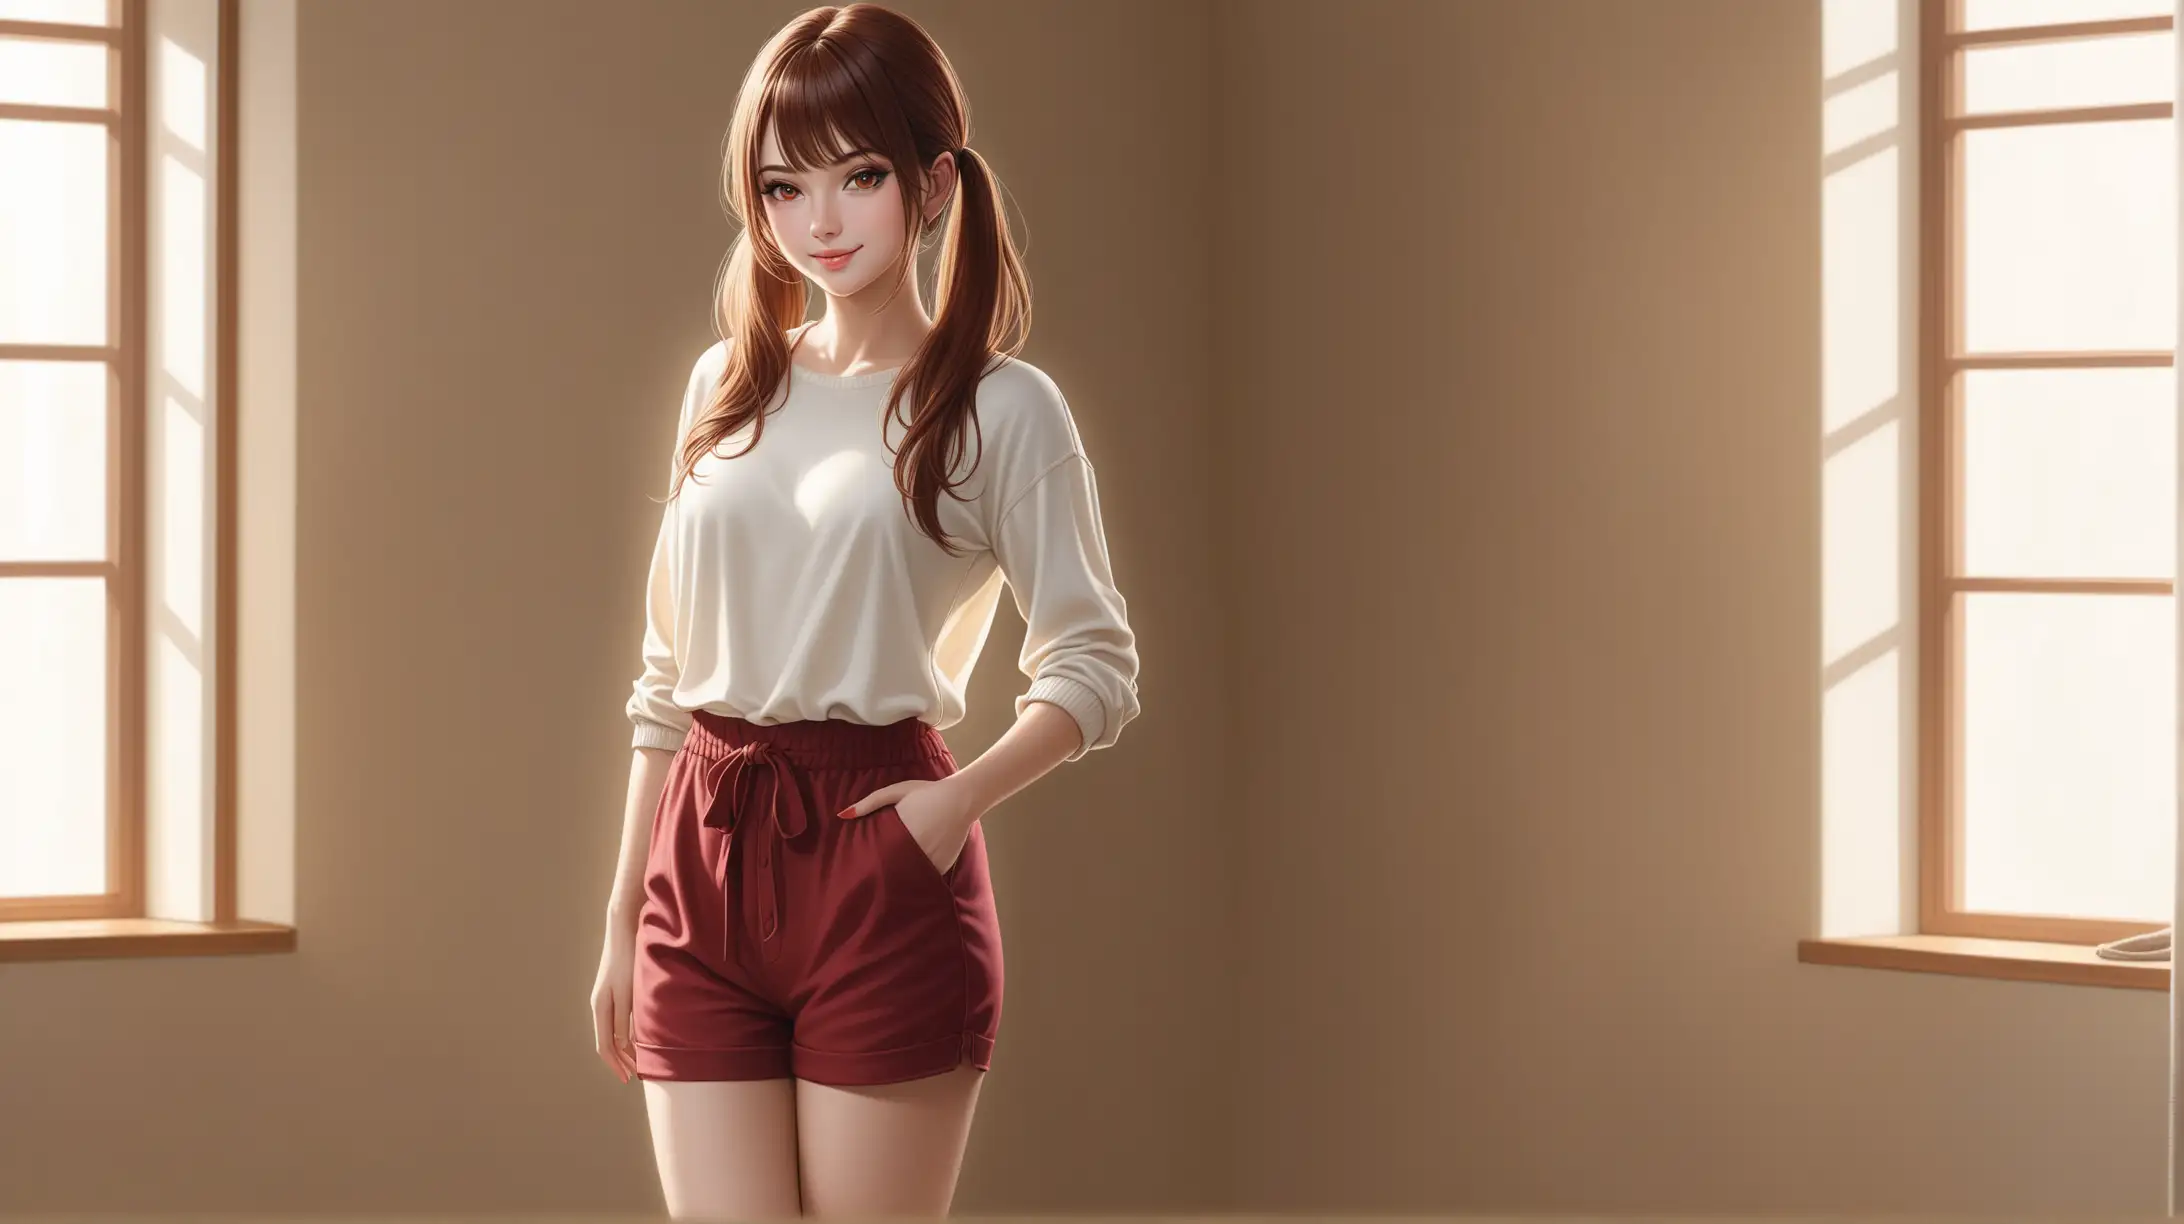 Seductive Woman with Long ReddishBrown Hair in Casual Outfit